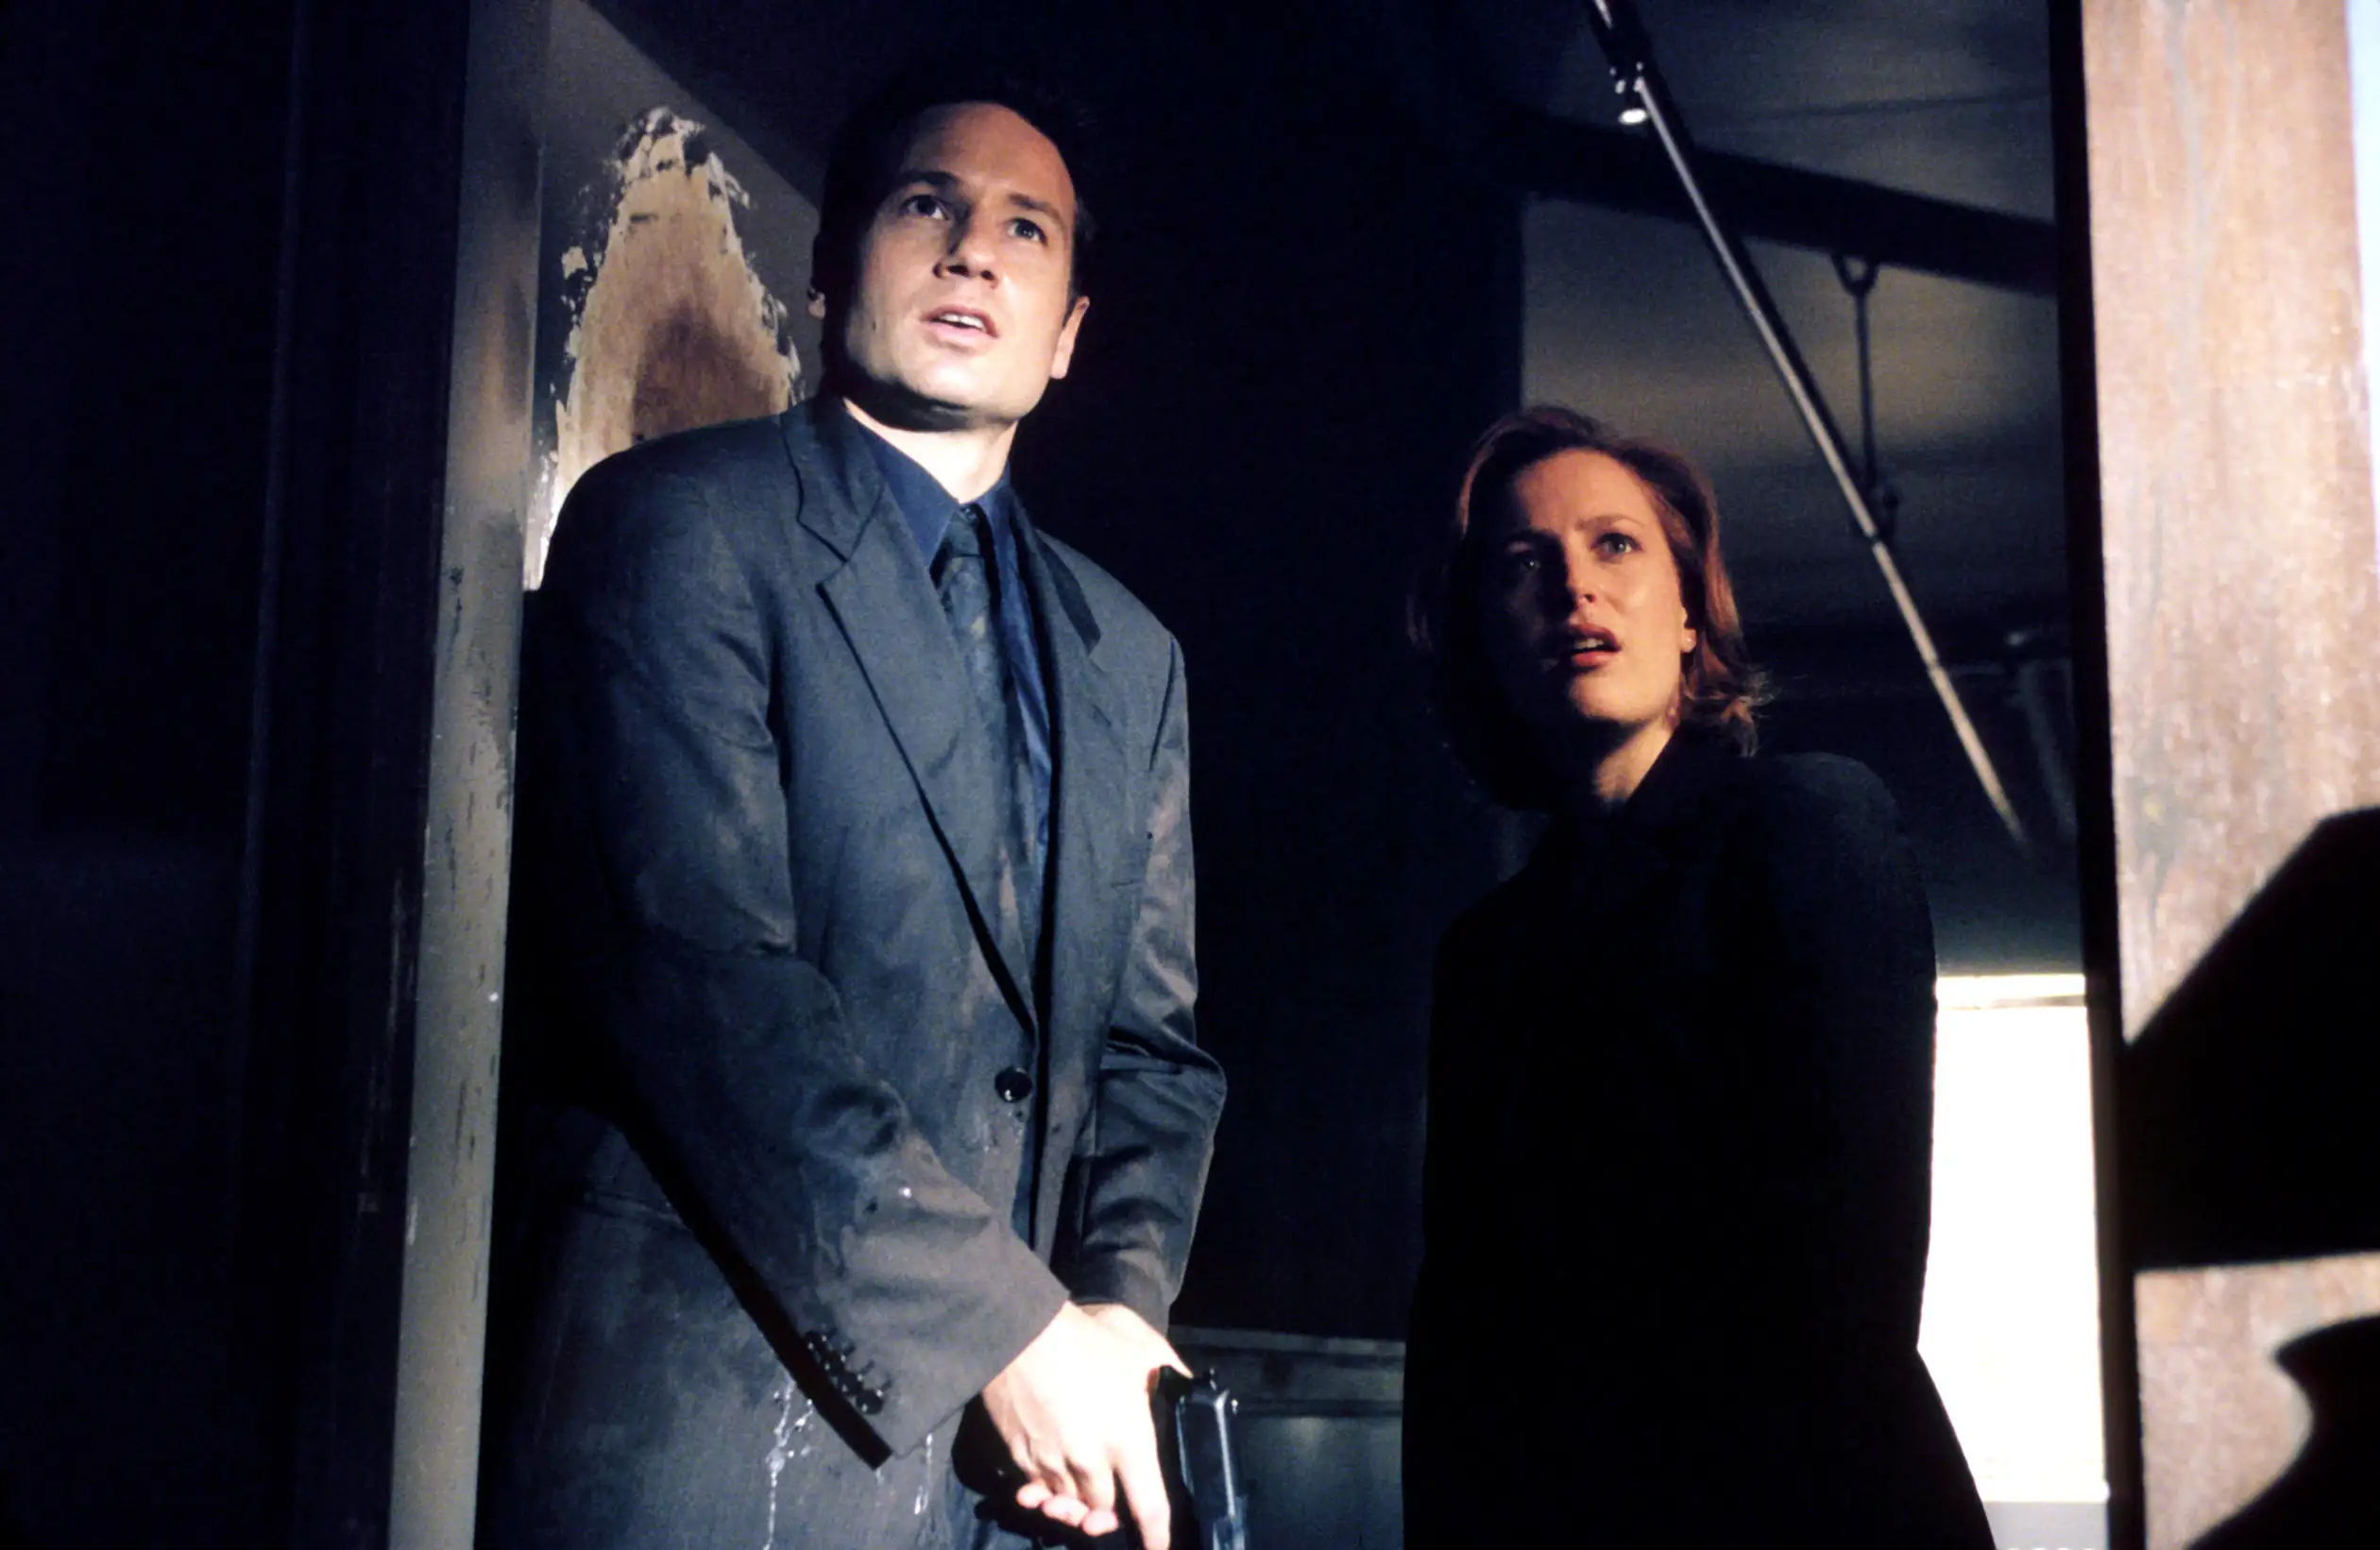 THE X-FILES, David Duchovny, Gillian Anderson, &quot;The Goldberg Variation&quot; airing 12/12/99 (Season 7),